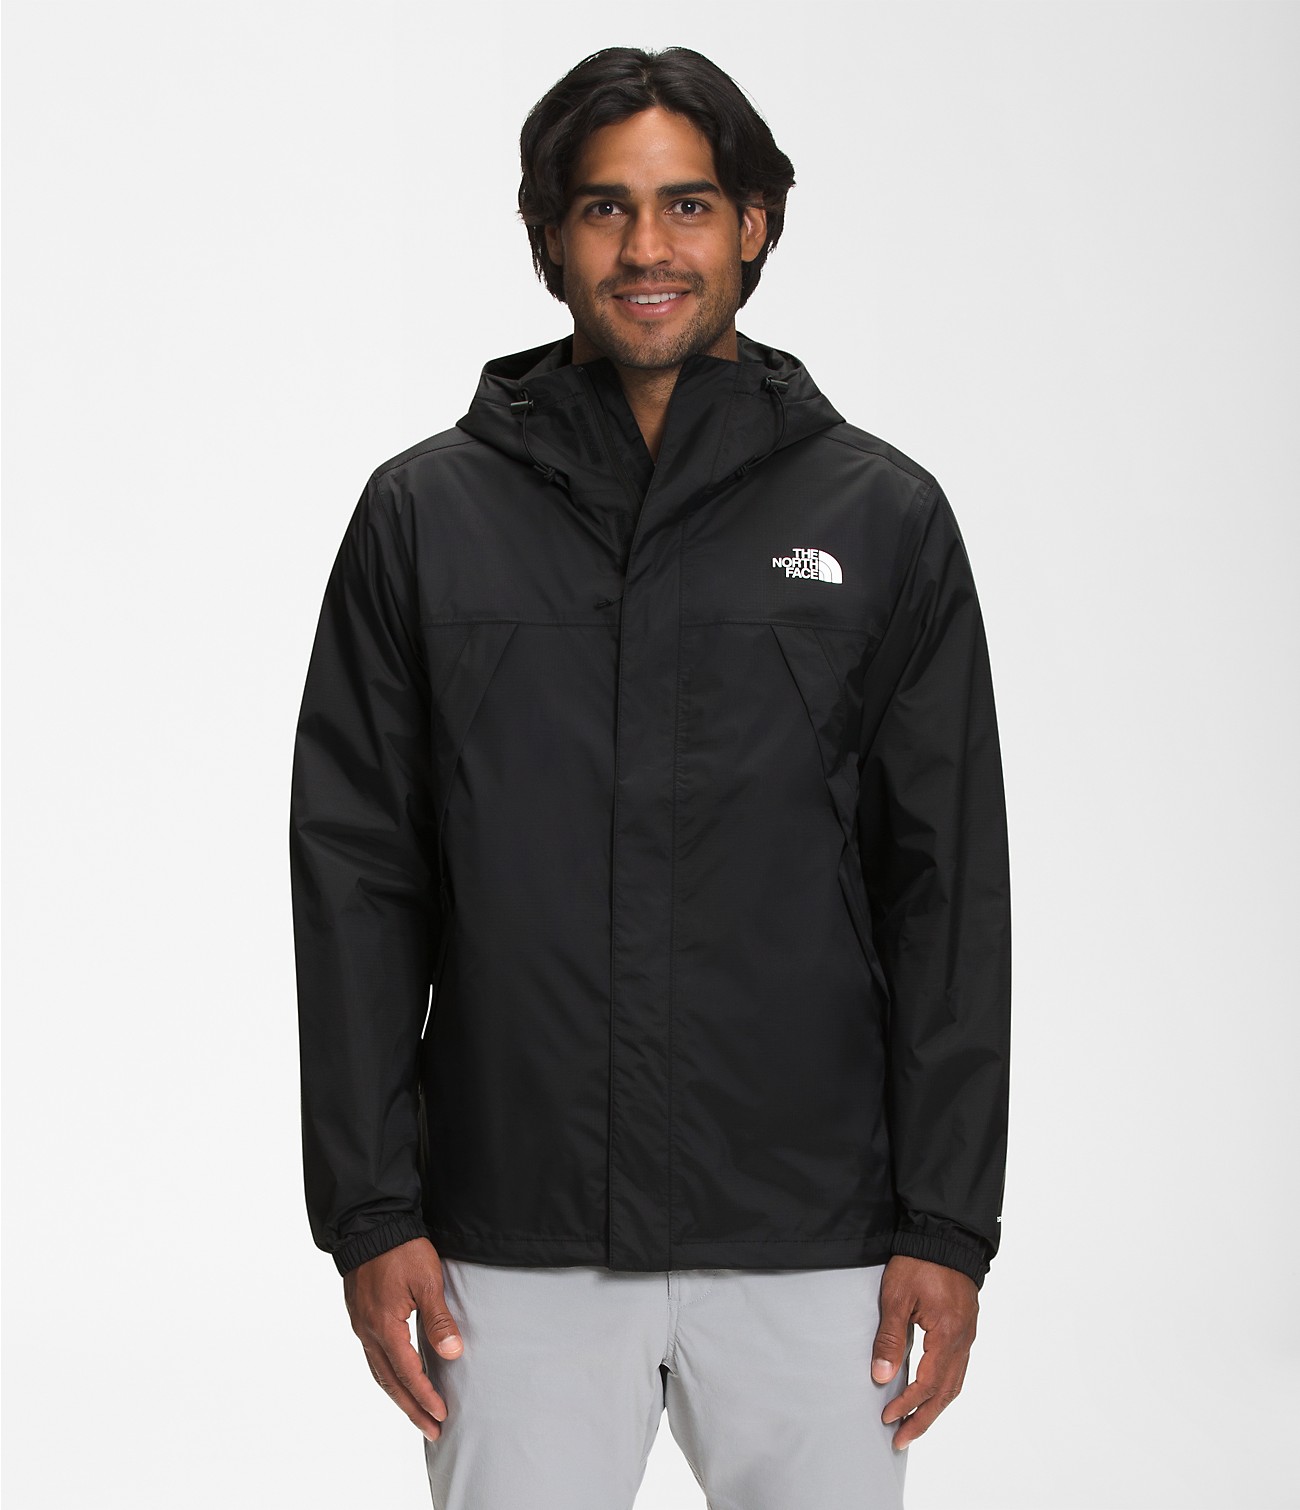 Unlock Wilderness' choice in the Lands' End Vs North Face comparison, the Antora Jacket by The North Face